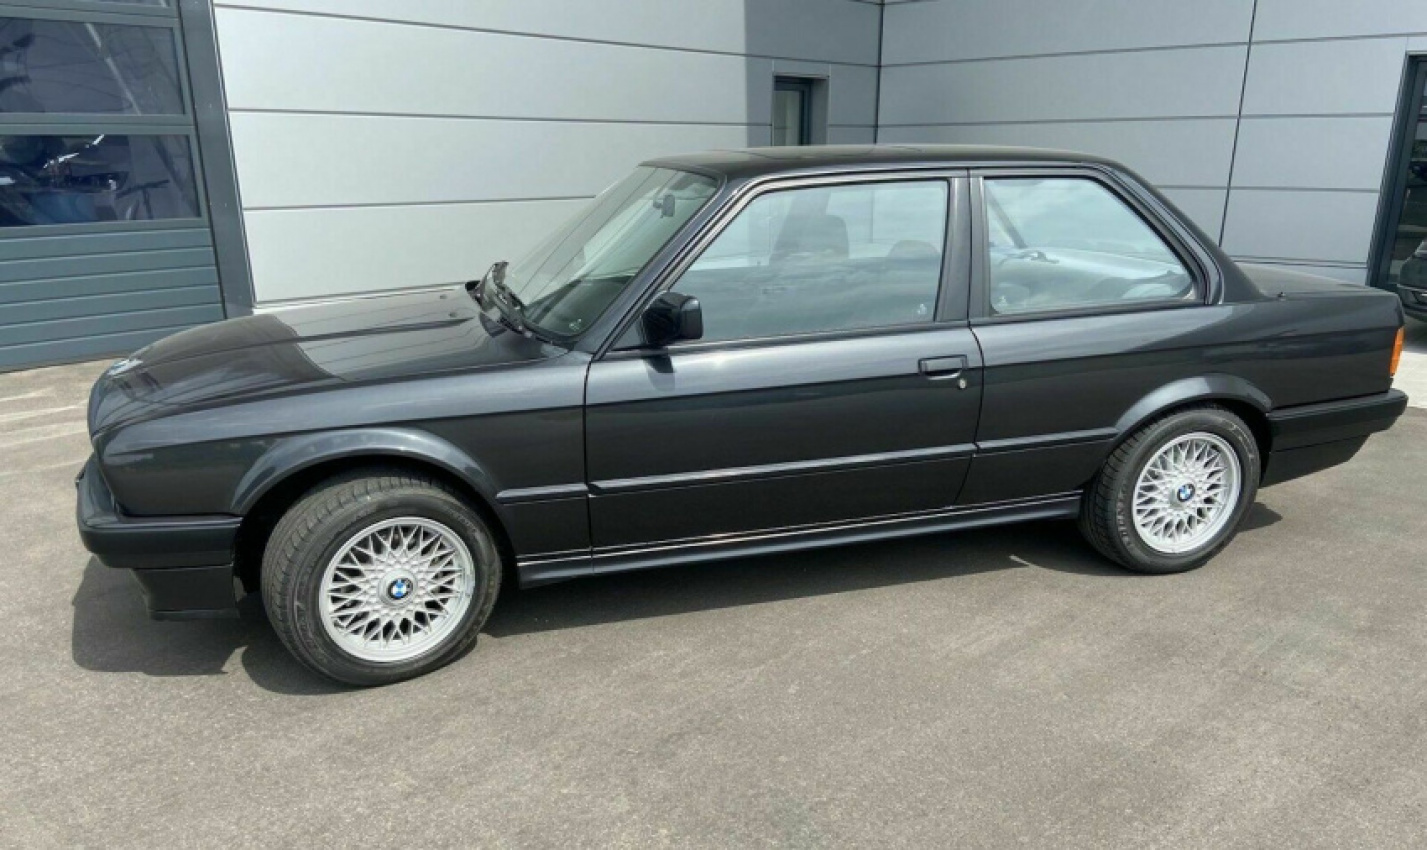 autos, bmw, cars, news, bmw 3 series, bmw 320i, classics, this 1990 bmw 320i is one of the lowest mileage e30s we’ve ever seen